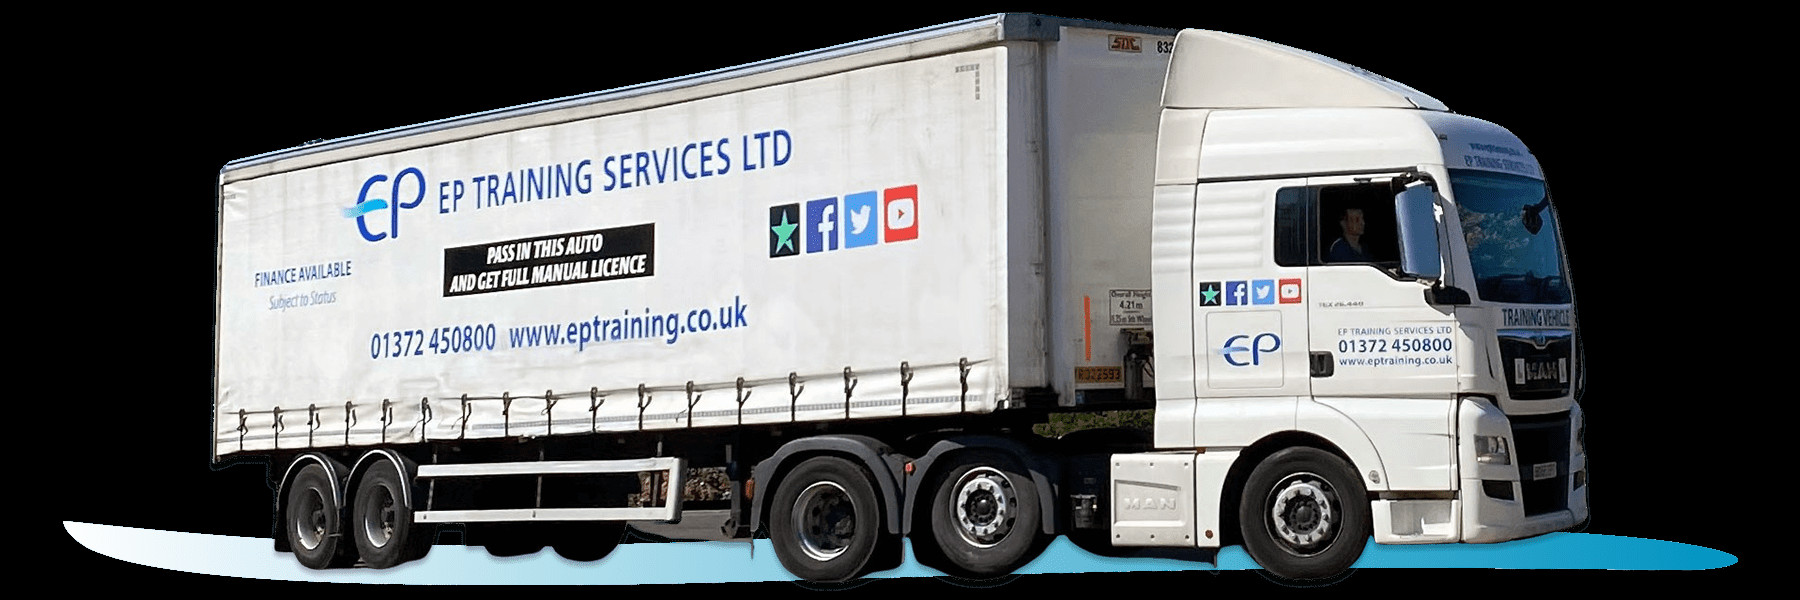 We pride ourselves as being recognised as the number one for <span>HGV & LGV training courses</span> for Surrey and ALL surrounding areas